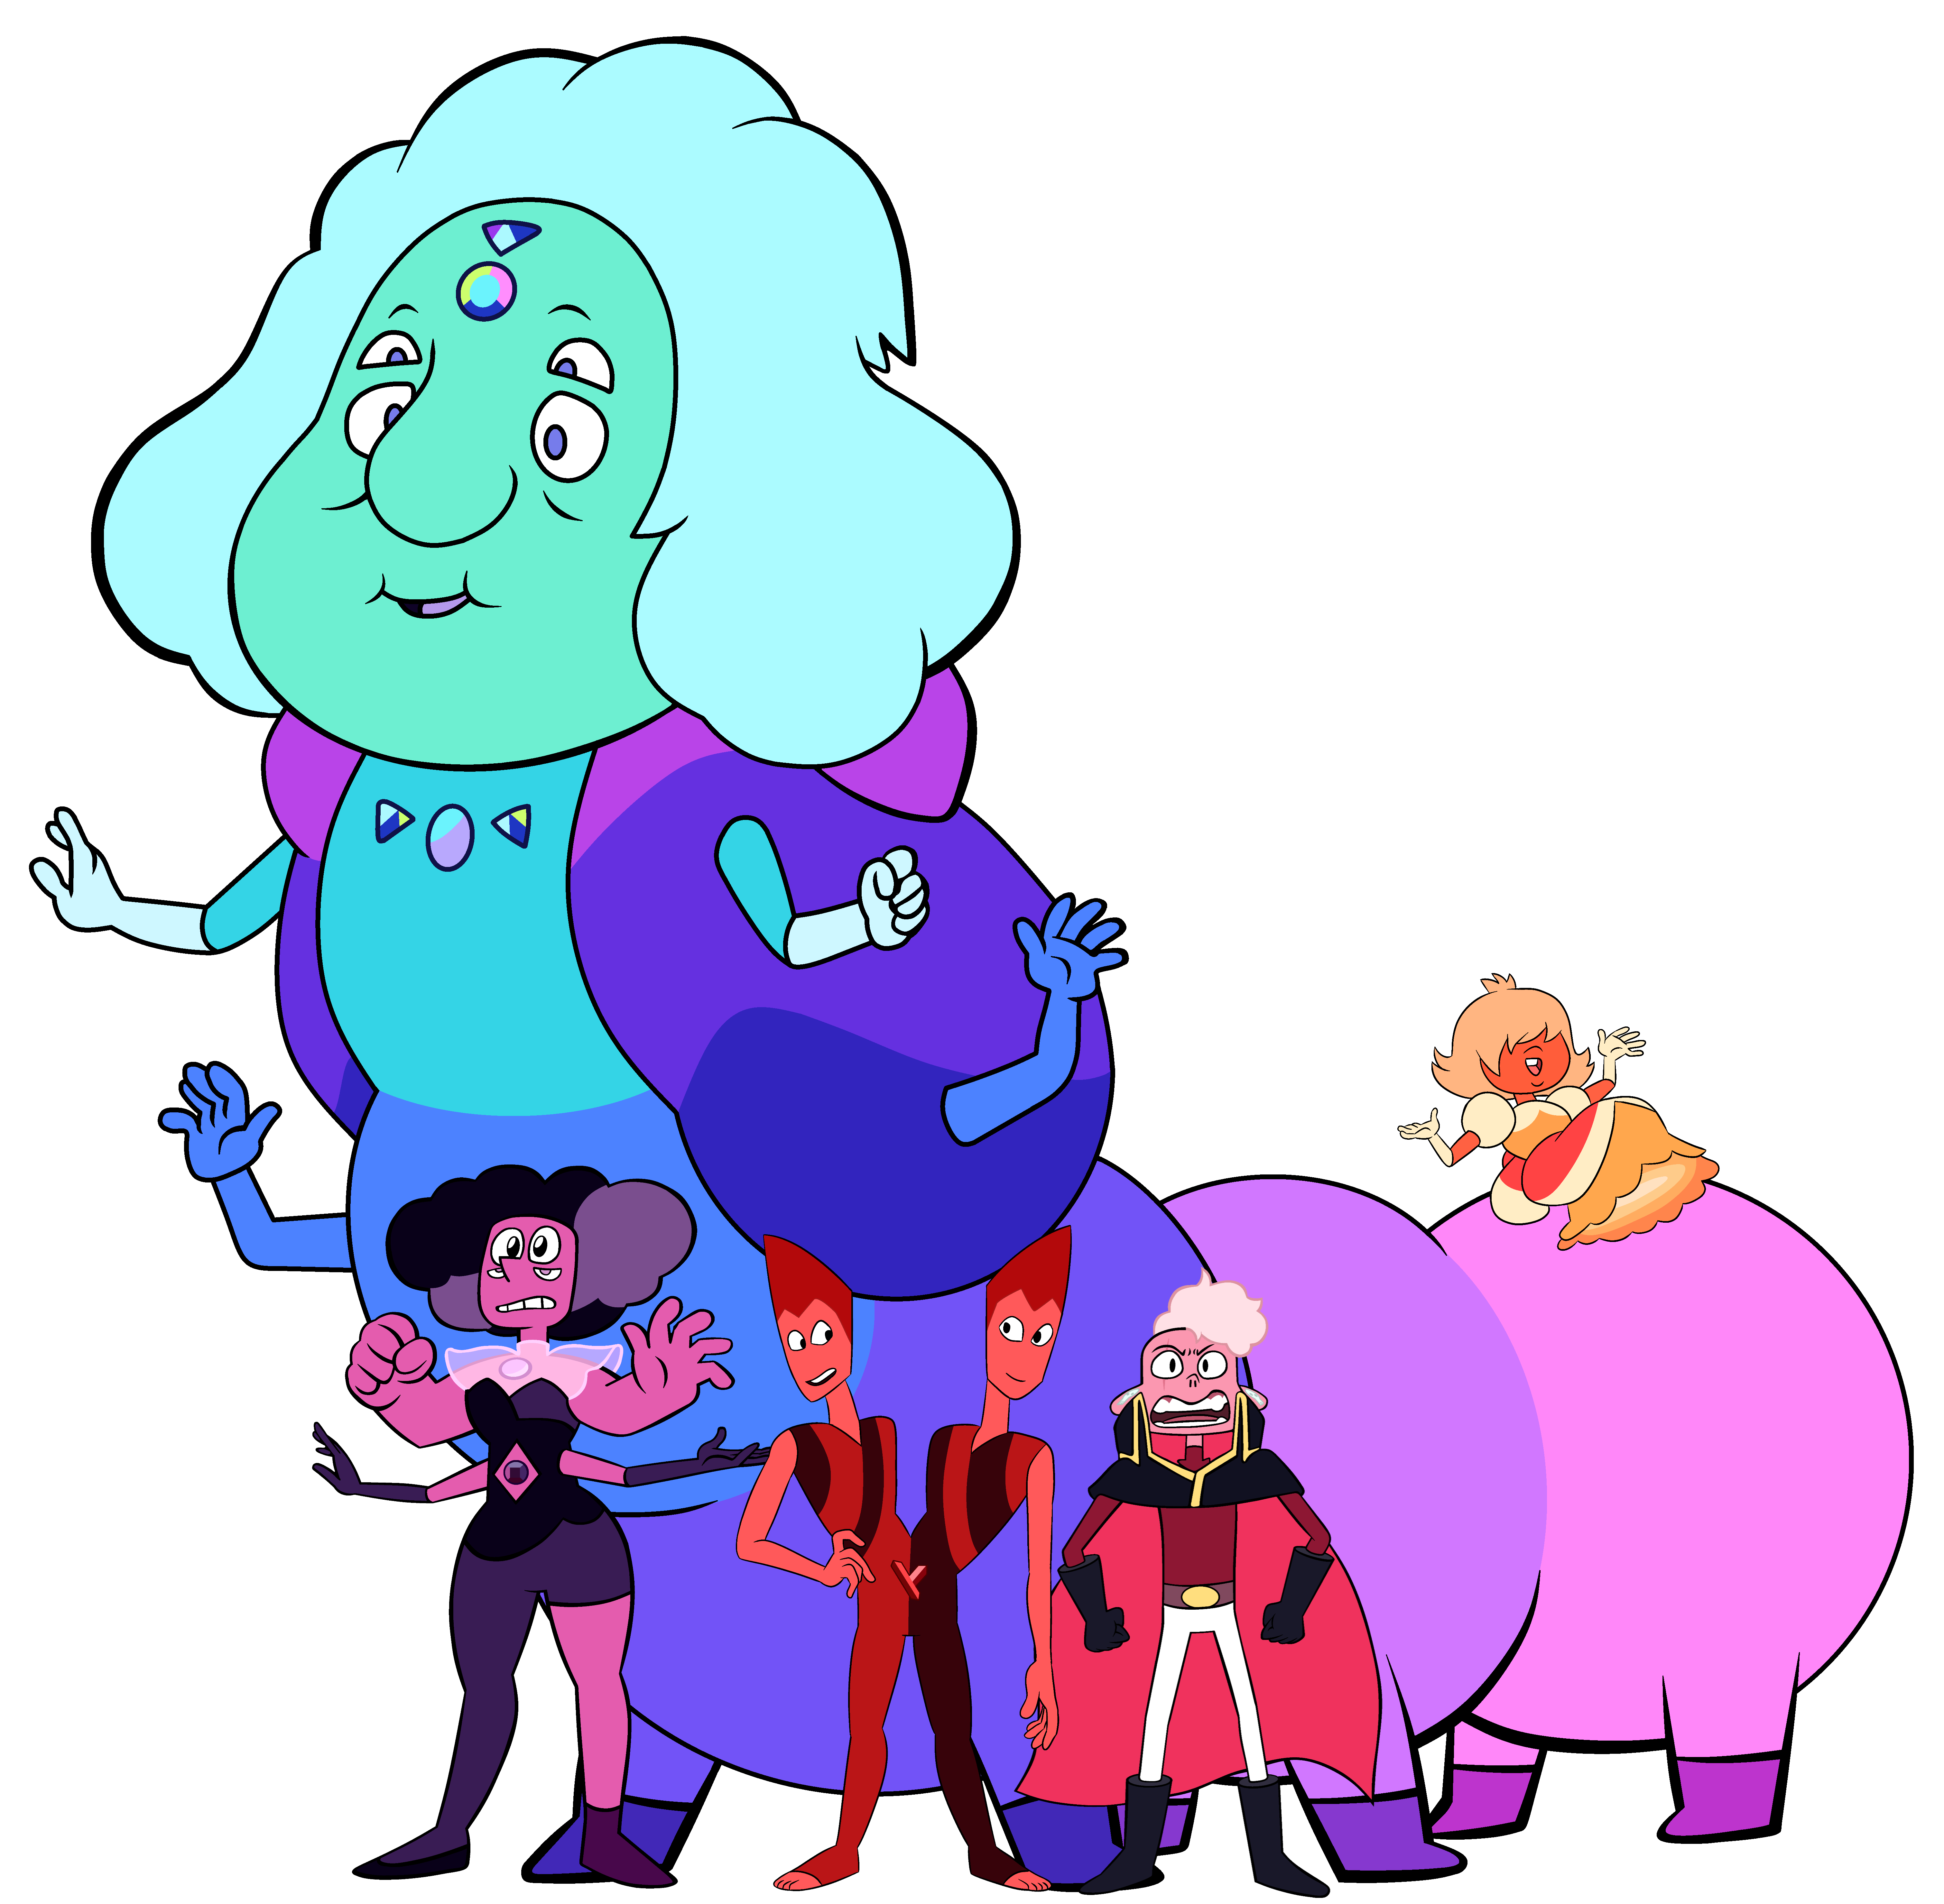 This is an online portal for the Cartoon Network show Steven Universe. 